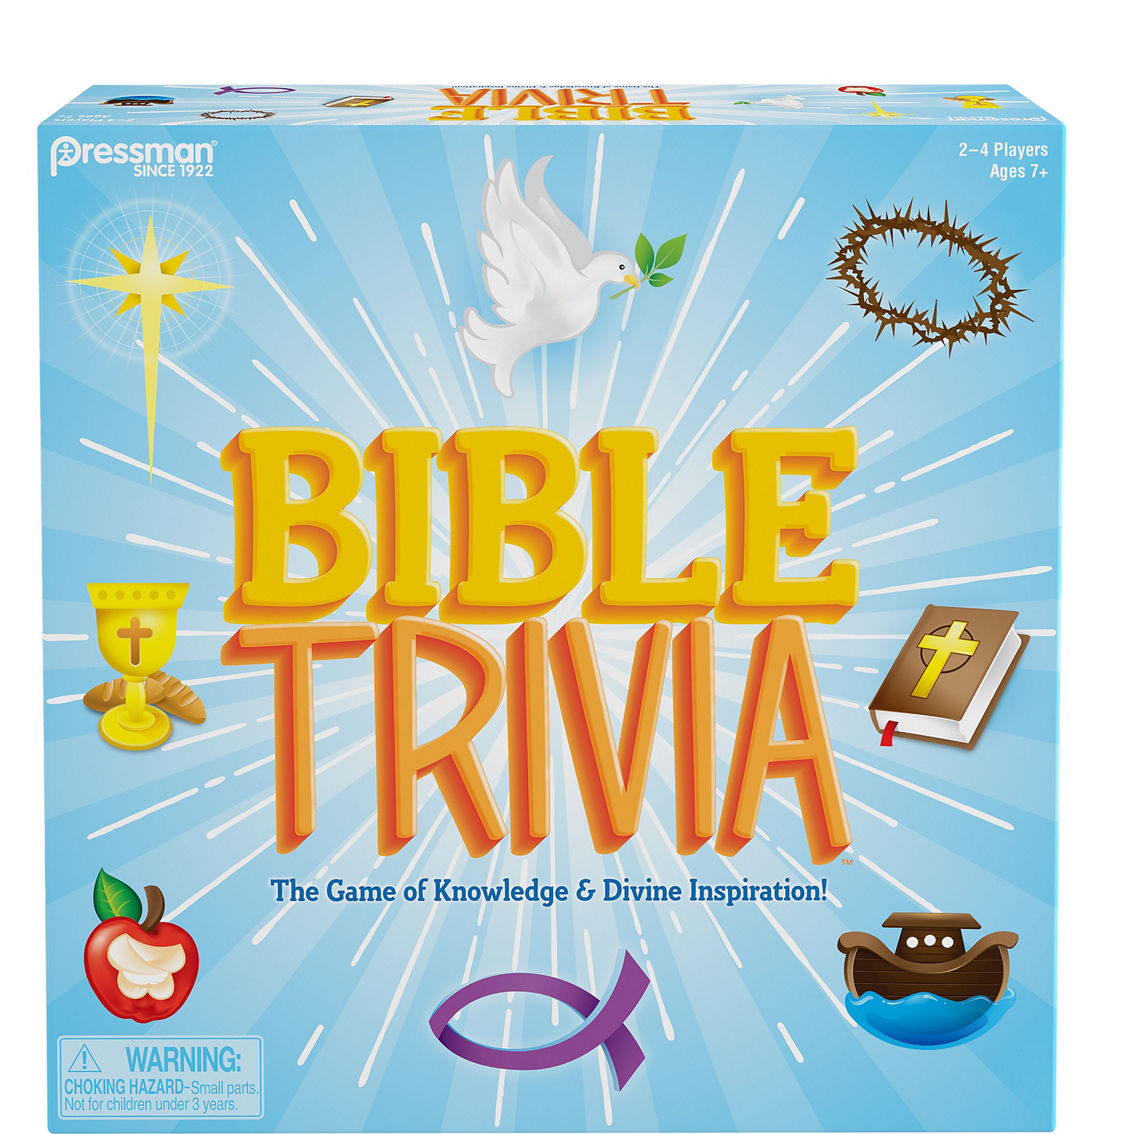 Pressman Toy Bible Trivia - The Game of Knowledge & Divine Inspiration! - Image 5 of 5